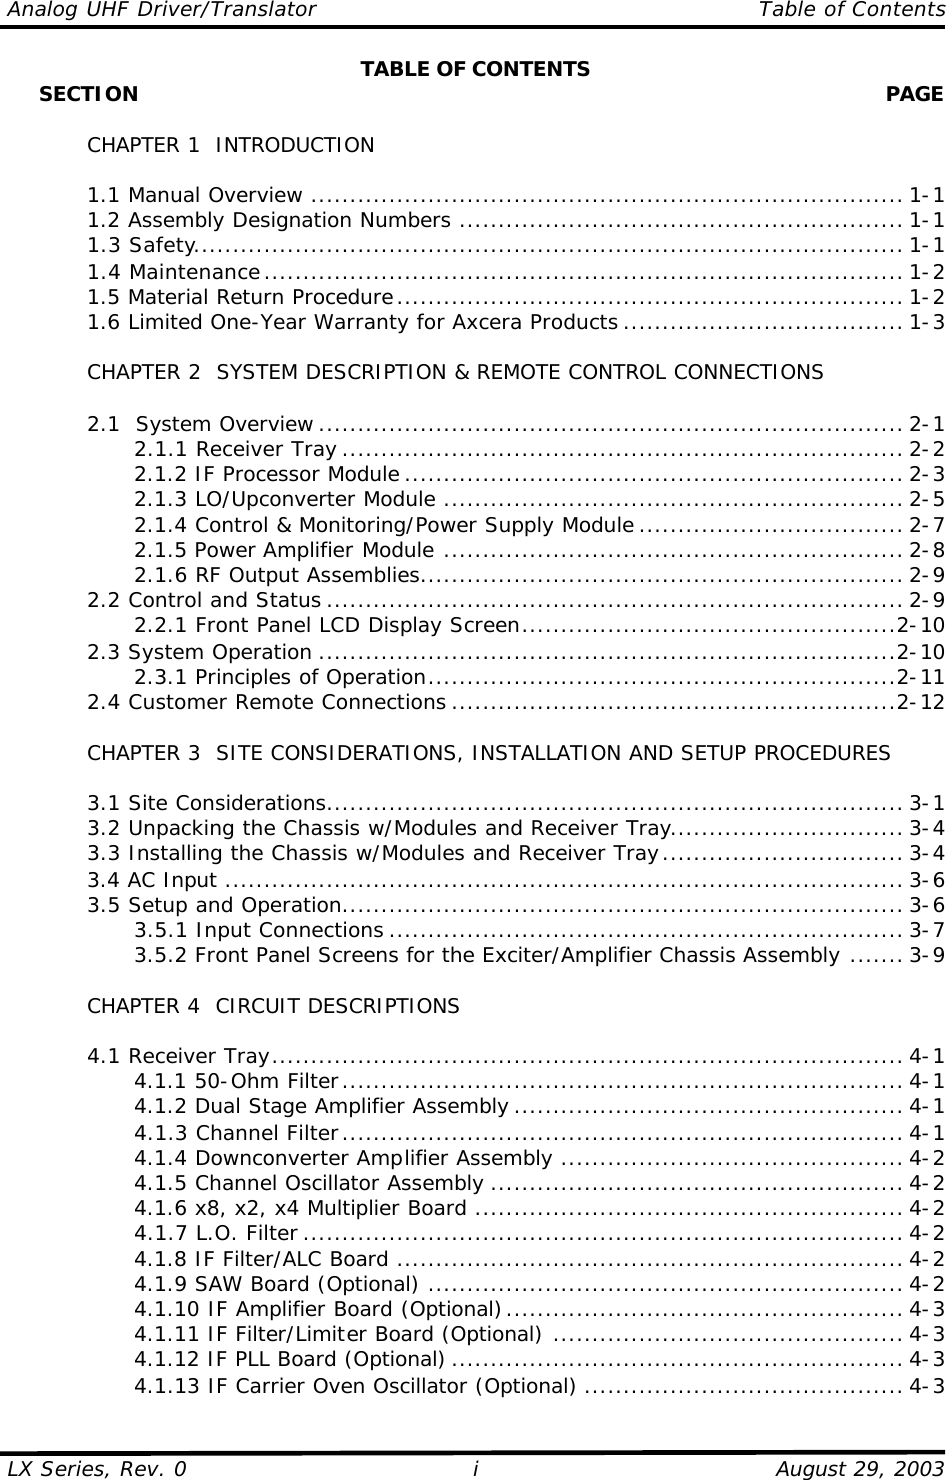 Analog UHF Driver/Translator    Table of Contents  LX Series, Rev. 0    August 29, 2003 i TABLE OF CONTENTS      SECTION    PAGE     CHAPTER 1  INTRODUCTION   1.1 Manual Overview ............................................................................ 1-1  1.2 Assembly Designation Numbers ......................................................... 1-1  1.3 Safety........................................................................................... 1-1  1.4 Maintenance.................................................................................. 1-2  1.5 Material Return Procedure................................................................. 1-2  1.6 Limited One-Year Warranty for Axcera Products .................................... 1-3   CHAPTER 2  SYSTEM DESCRIPTION &amp; REMOTE CONTROL CONNECTIONS   2.1  System Overview ........................................................................... 2-1     2.1.1 Receiver Tray ........................................................................ 2-2     2.1.2 IF Processor Module ................................................................ 2-3     2.1.3 LO/Upconverter Module ........................................................... 2-5     2.1.4 Control &amp; Monitoring/Power Supply Module .................................. 2-7     2.1.5 Power Amplifier Module ........................................................... 2-8     2.1.6 RF Output Assemblies.............................................................. 2-9  2.2 Control and Status .......................................................................... 2-9     2.2.1 Front Panel LCD Display Screen................................................2-10  2.3 System Operation ..........................................................................2-10     2.3.1 Principles of Operation............................................................2-11  2.4 Customer Remote Connections .........................................................2-12       CHAPTER 3  SITE CONSIDERATIONS, INSTALLATION AND SETUP PROCEDURES     3.1 Site Considerations.......................................................................... 3-1  3.2 Unpacking the Chassis w/Modules and Receiver Tray.............................. 3-4  3.3 Installing the Chassis w/Modules and Receiver Tray............................... 3-4  3.4 AC Input ....................................................................................... 3-6  3.5 Setup and Operation........................................................................ 3-6     3.5.1 Input Connections .................................................................. 3-7     3.5.2 Front Panel Screens for the Exciter/Amplifier Chassis Assembly ....... 3-9   CHAPTER 4  CIRCUIT DESCRIPTIONS   4.1 Receiver Tray................................................................................. 4-1     4.1.1 50-Ohm Filter........................................................................ 4-1     4.1.2 Dual Stage Amplifier Assembly .................................................. 4-1     4.1.3 Channel Filter........................................................................ 4-1     4.1.4 Downconverter Amplifier Assembly ............................................ 4-2     4.1.5 Channel Oscillator Assembly ..................................................... 4-2     4.1.6 x8, x2, x4 Multiplier Board ....................................................... 4-2     4.1.7 L.O. Filter ............................................................................. 4-2     4.1.8 IF Filter/ALC Board ................................................................. 4-2     4.1.9 SAW Board (Optional) ............................................................. 4-2     4.1.10 IF Amplifier Board (Optional)................................................... 4-3     4.1.11 IF Filter/Limiter Board (Optional) ............................................. 4-3     4.1.12 IF PLL Board (Optional) .......................................................... 4-3     4.1.13 IF Carrier Oven Oscillator (Optional) ......................................... 4-3 